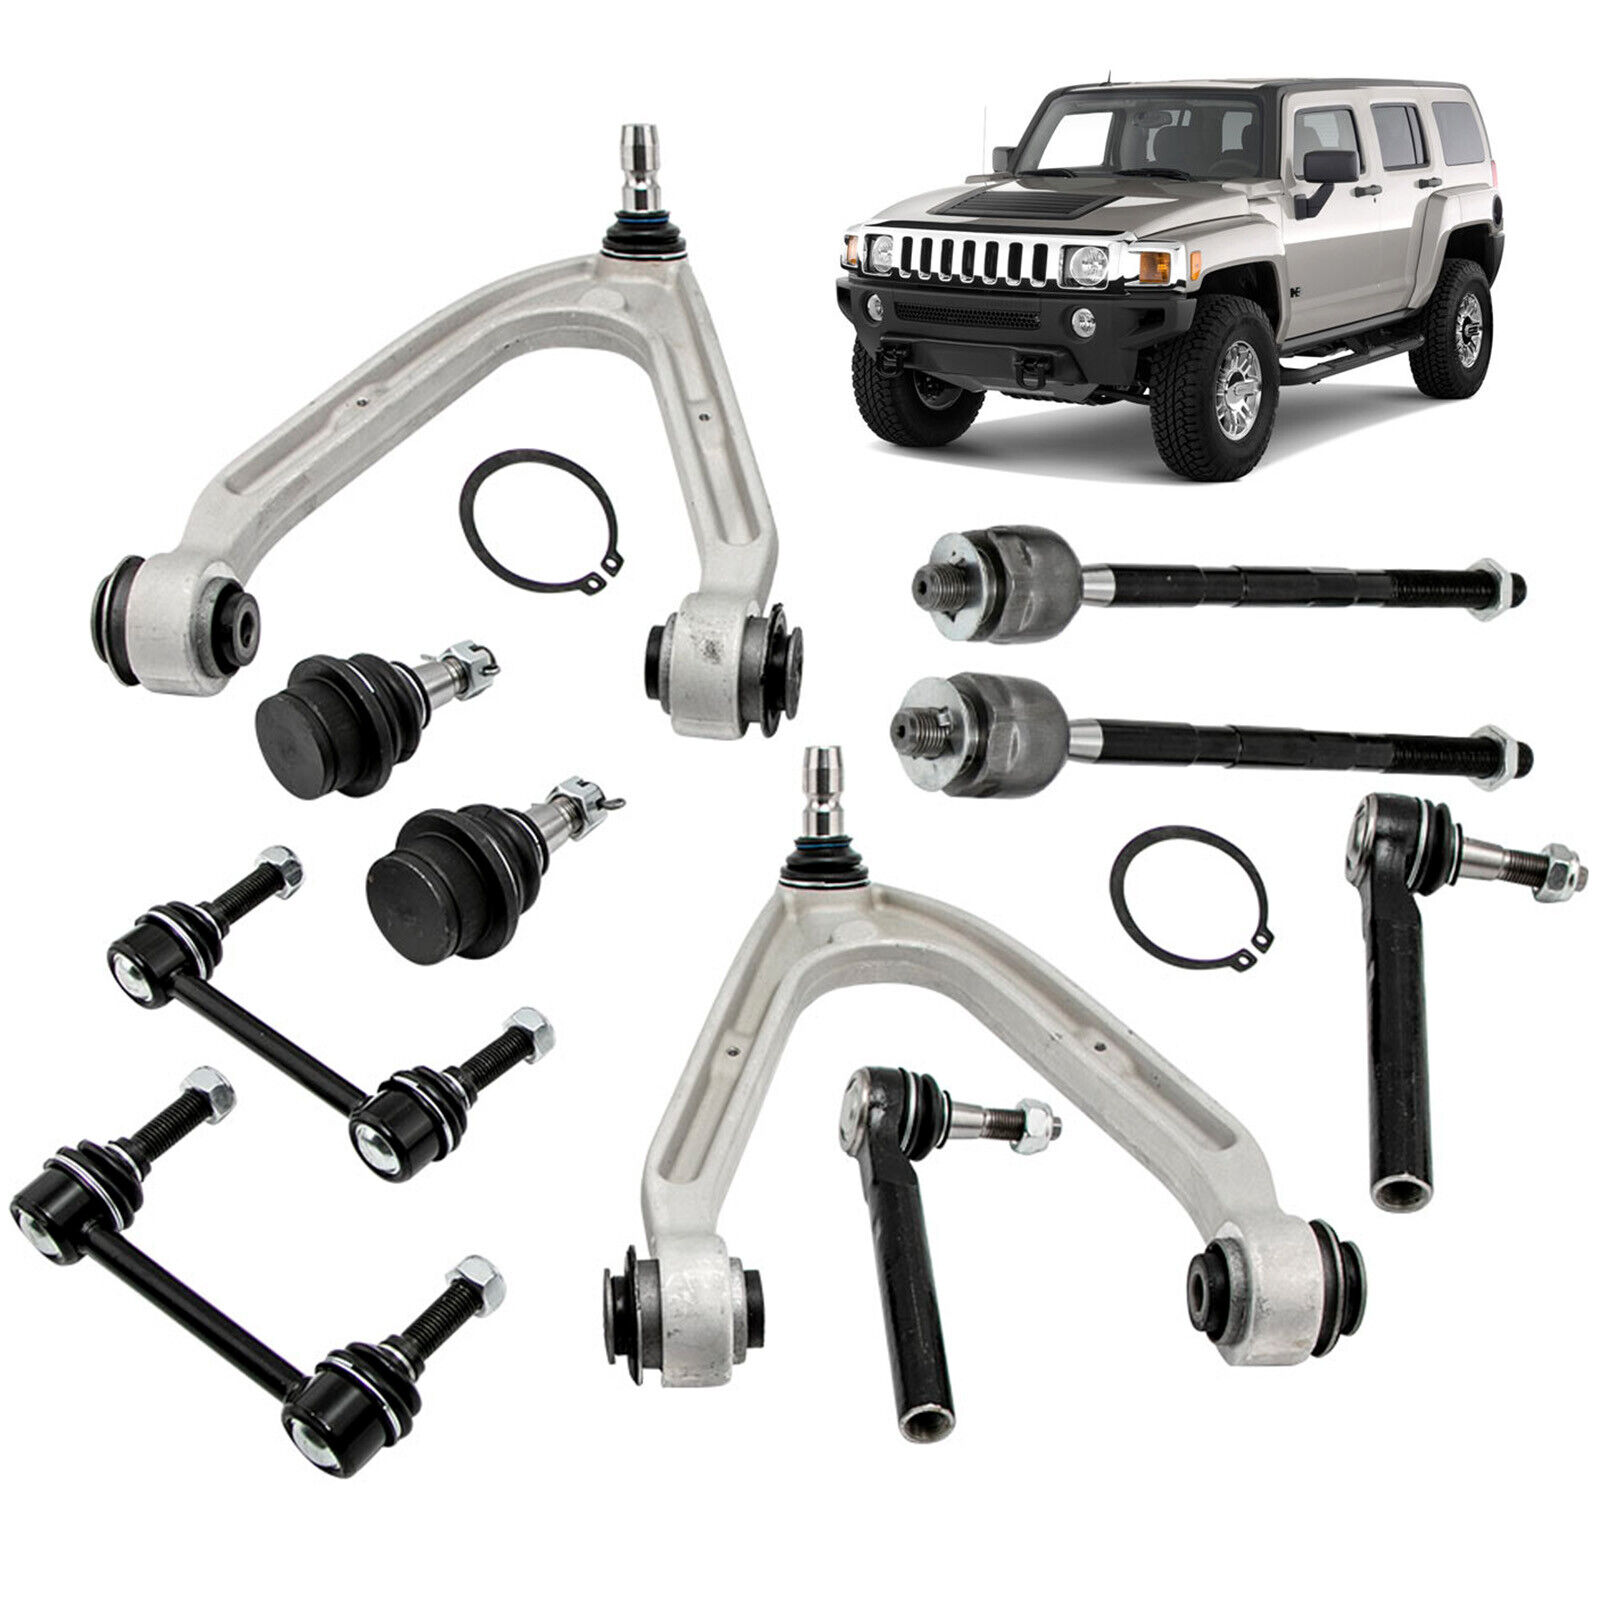 10x Front Upper Control Arms Tie Rod Sway Bar Link Kit For Hummer H3 2006-2010